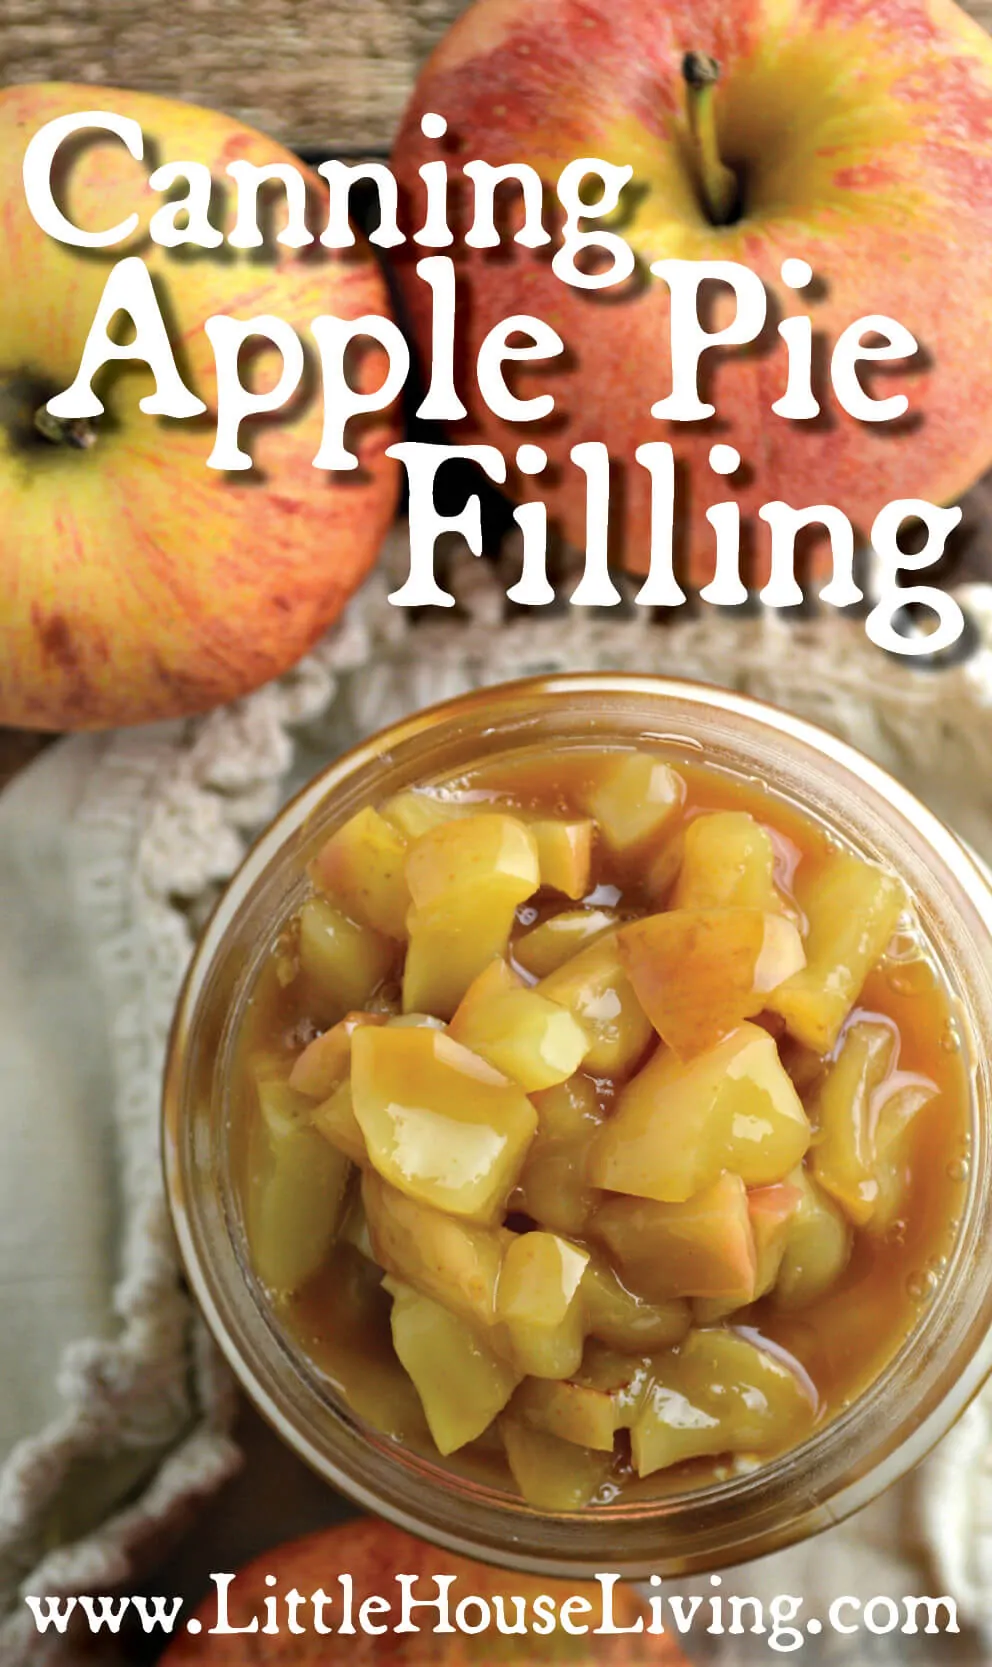 Canning Apple Pie Filling from Little House Living 2